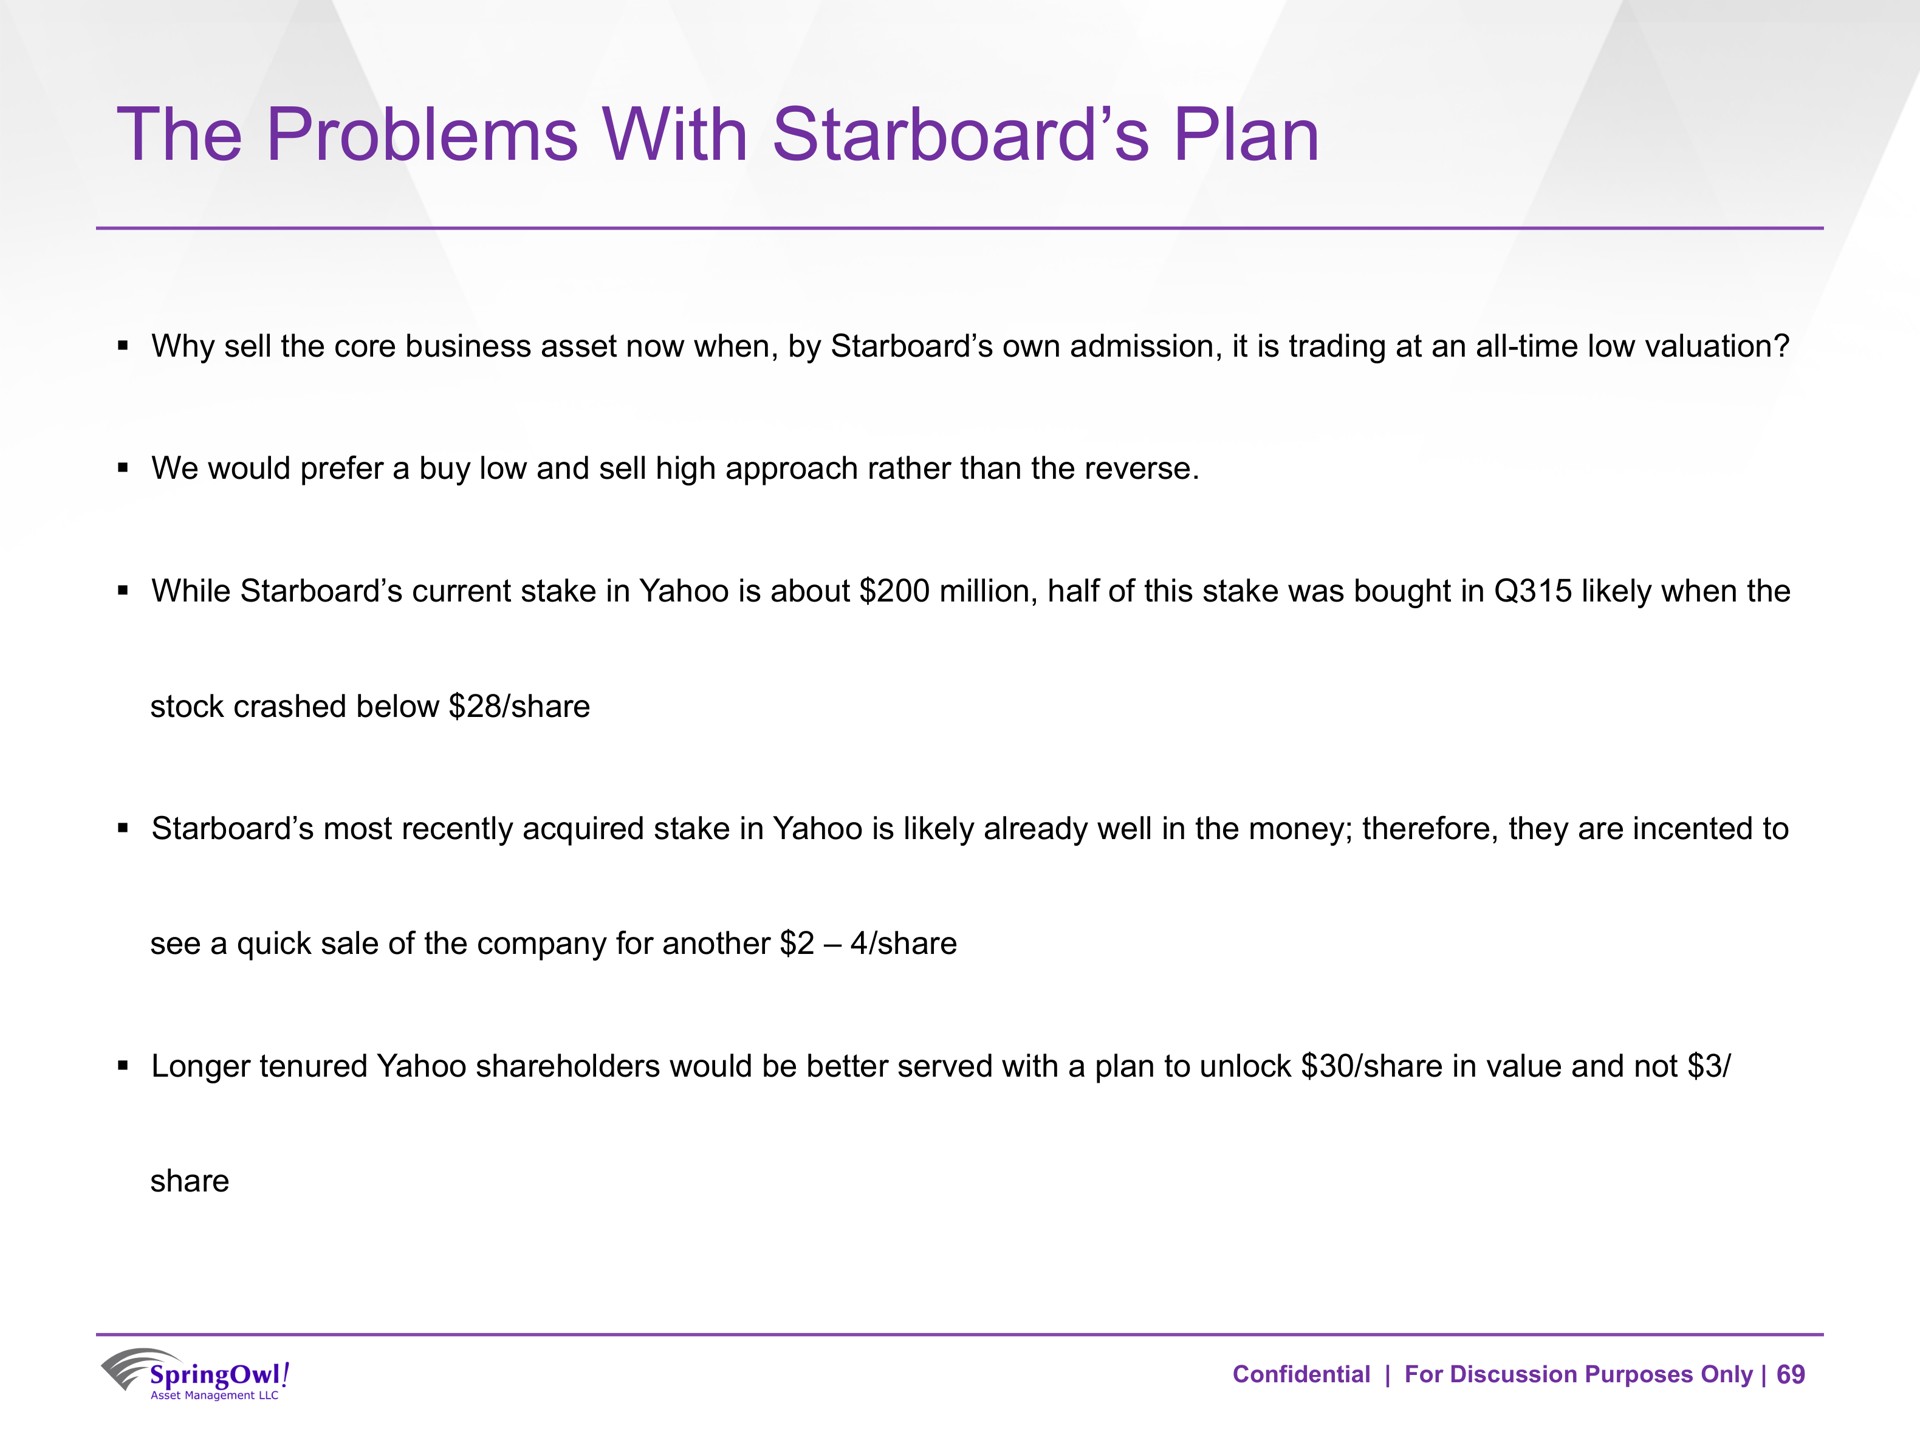 the problems with starboard plan | SpringOwl